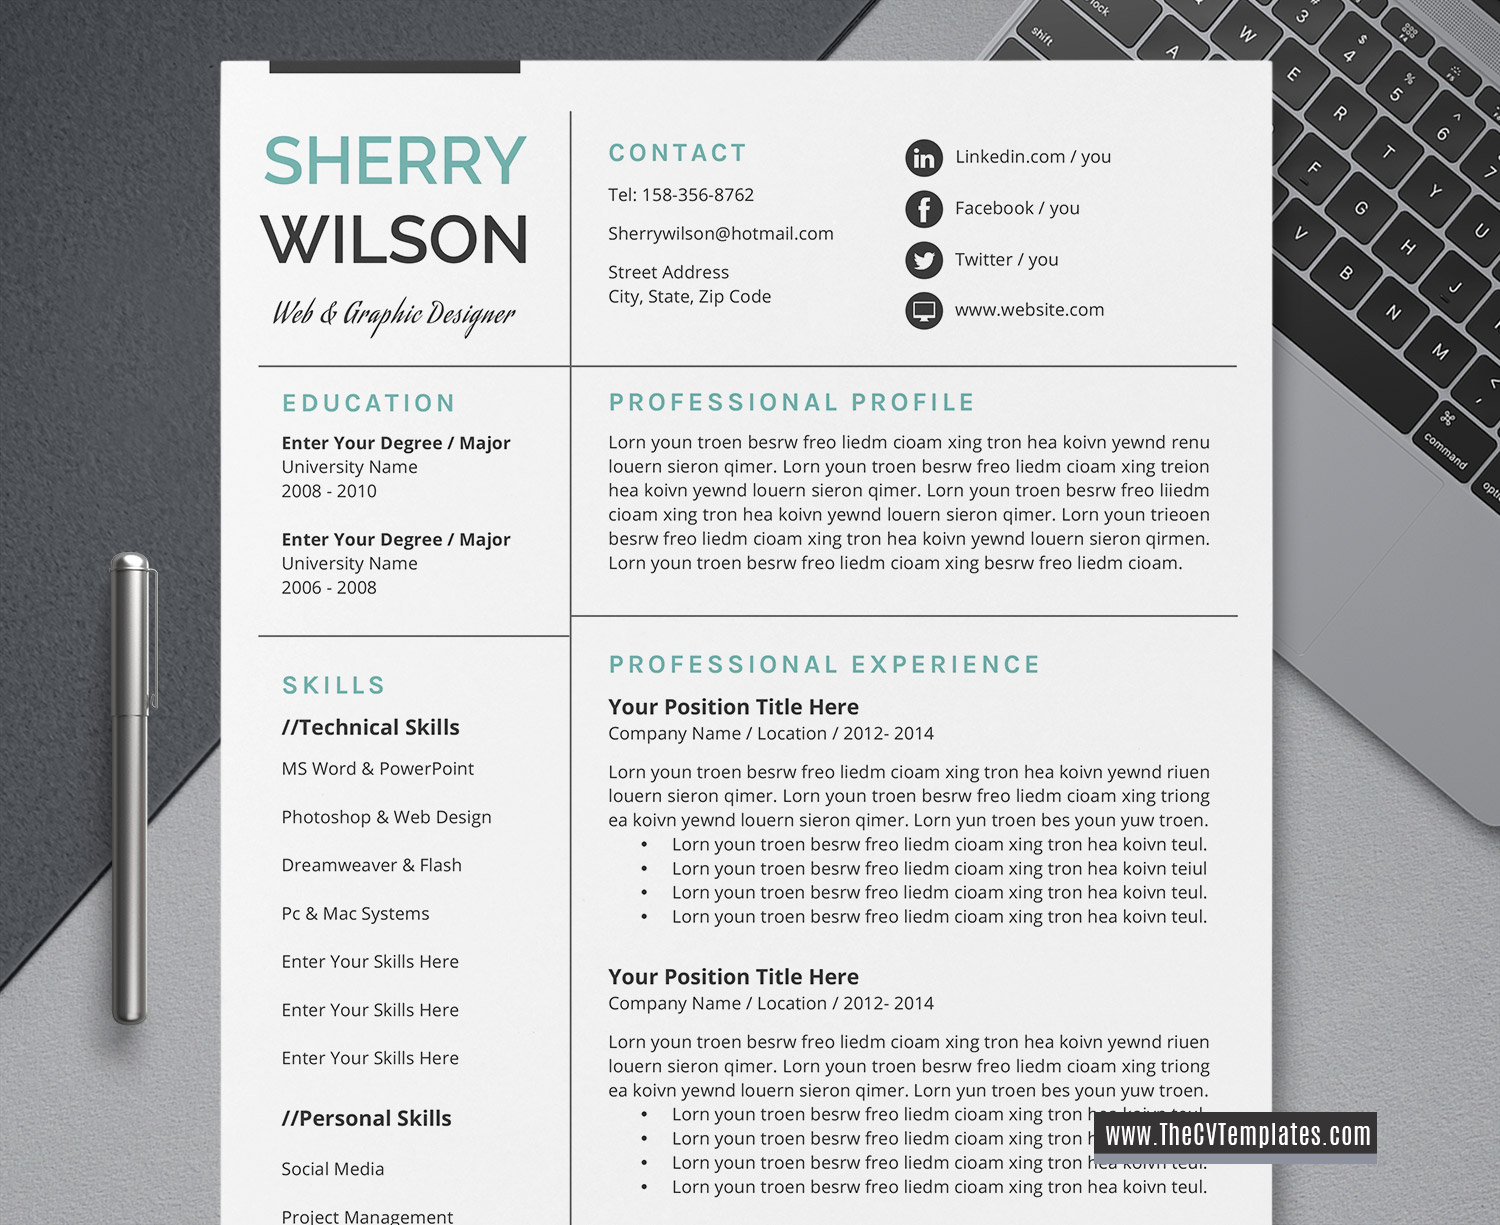 Uitgelezene 2020 Professional and Creative CV Template and Resume Template, 1 VQ-24